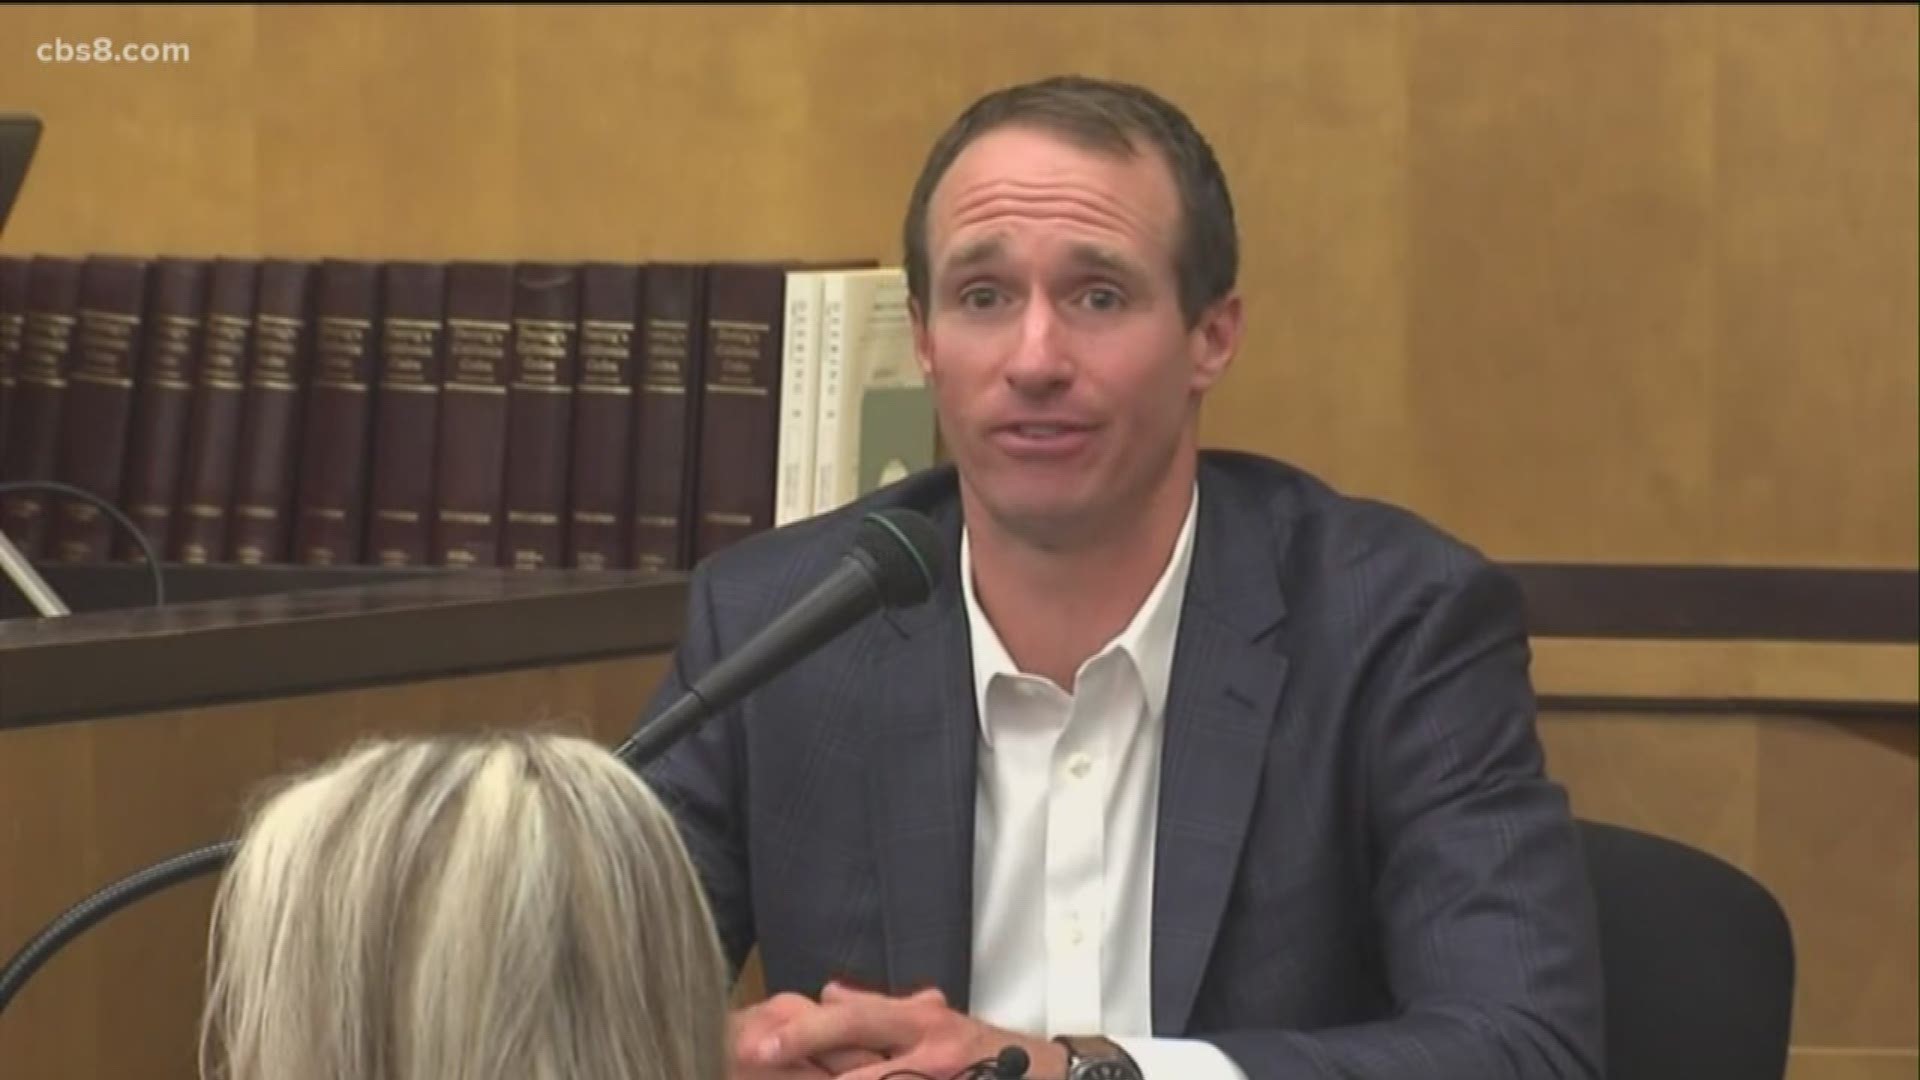 A La Jolla jeweler intentionally misled and defrauded NFL quarterback Drew Brees and Brees' wife out of millions of dollars when he sold them several diamonds at far above their actual value, the football pro's lawyer said Thursday, while a defense attorney alleged his client gave an accurate account of the diamonds' worth, but an independent appraiser scammed the couple by alleging the jeweler ripped them off.